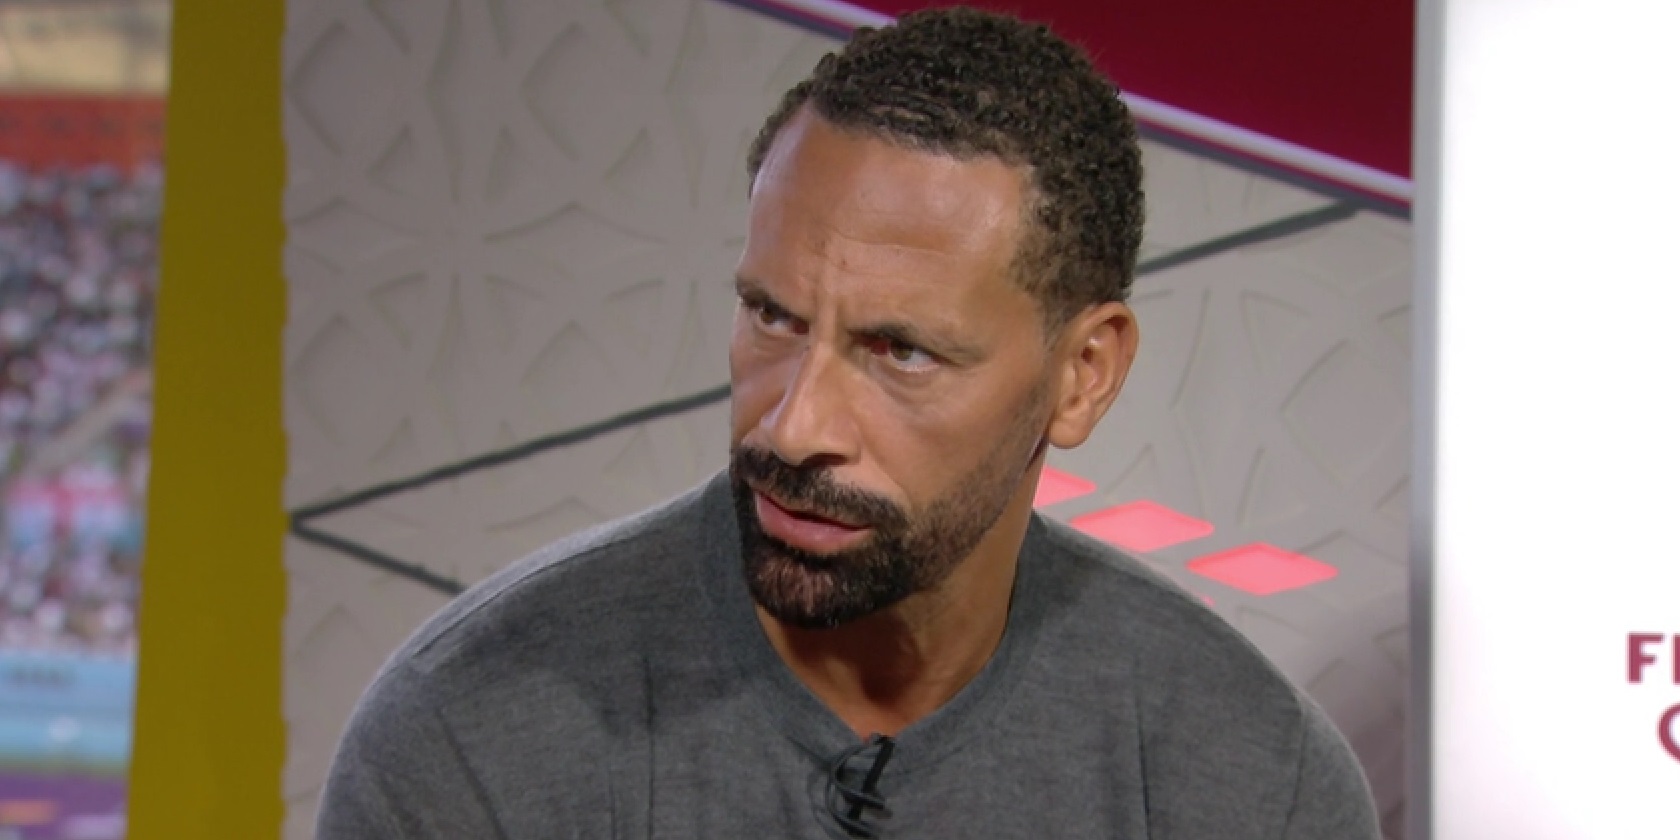 Rio Ferdinand shares exciting thing youth coaches have said about ‘phenomenal’ Liverpool target